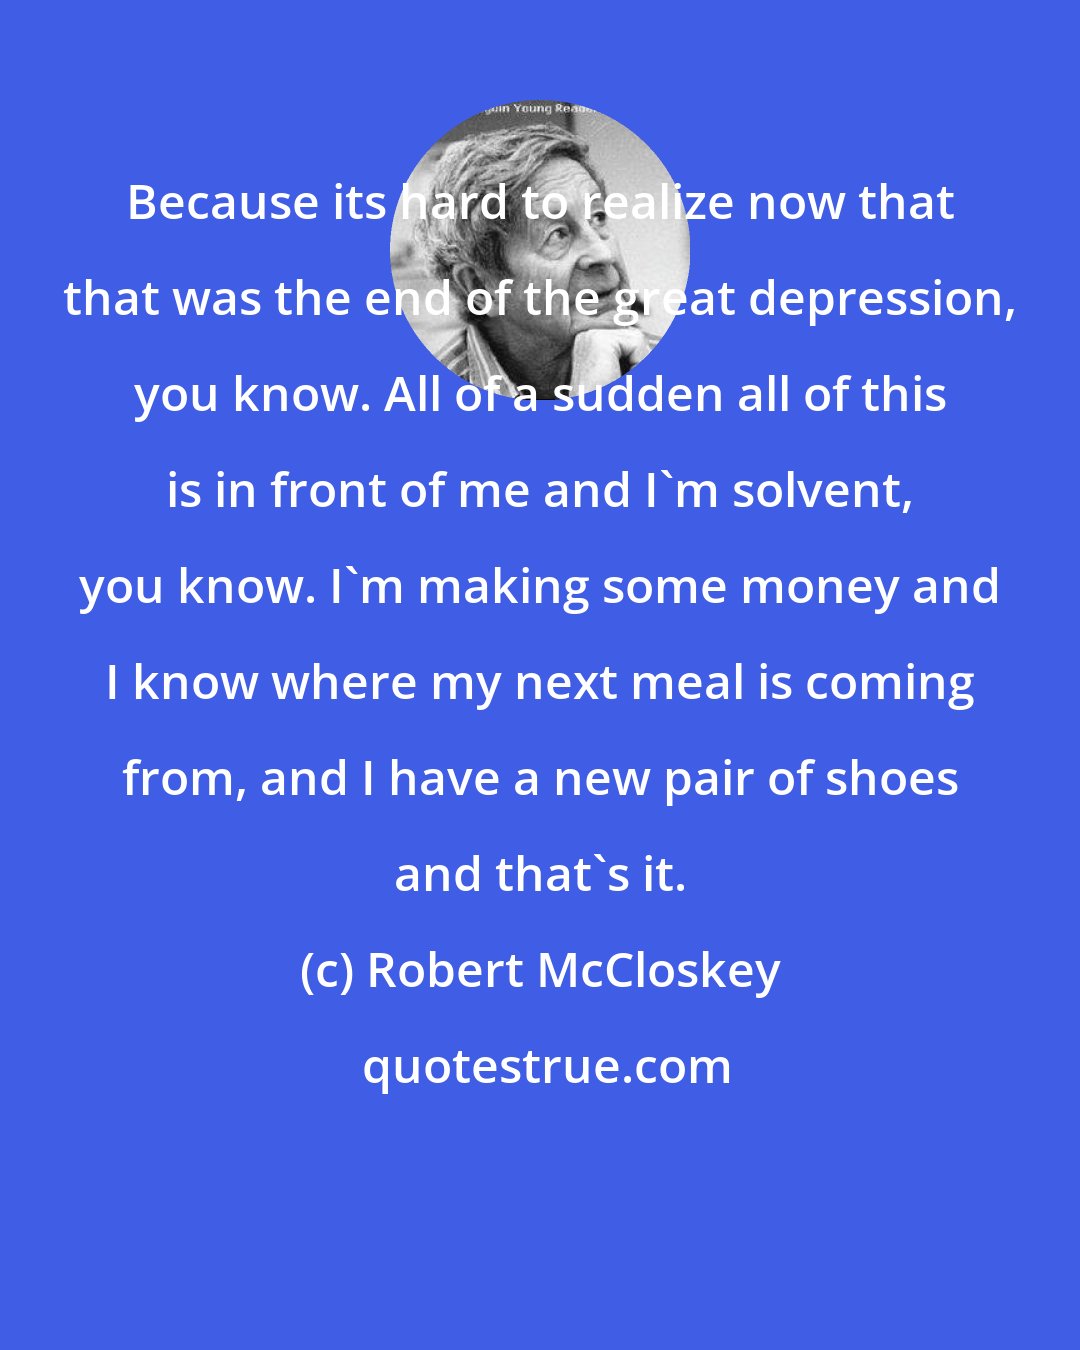 Robert McCloskey: Because its hard to realize now that that was the end of the great depression, you know. All of a sudden all of this is in front of me and I'm solvent, you know. I'm making some money and I know where my next meal is coming from, and I have a new pair of shoes and that's it.